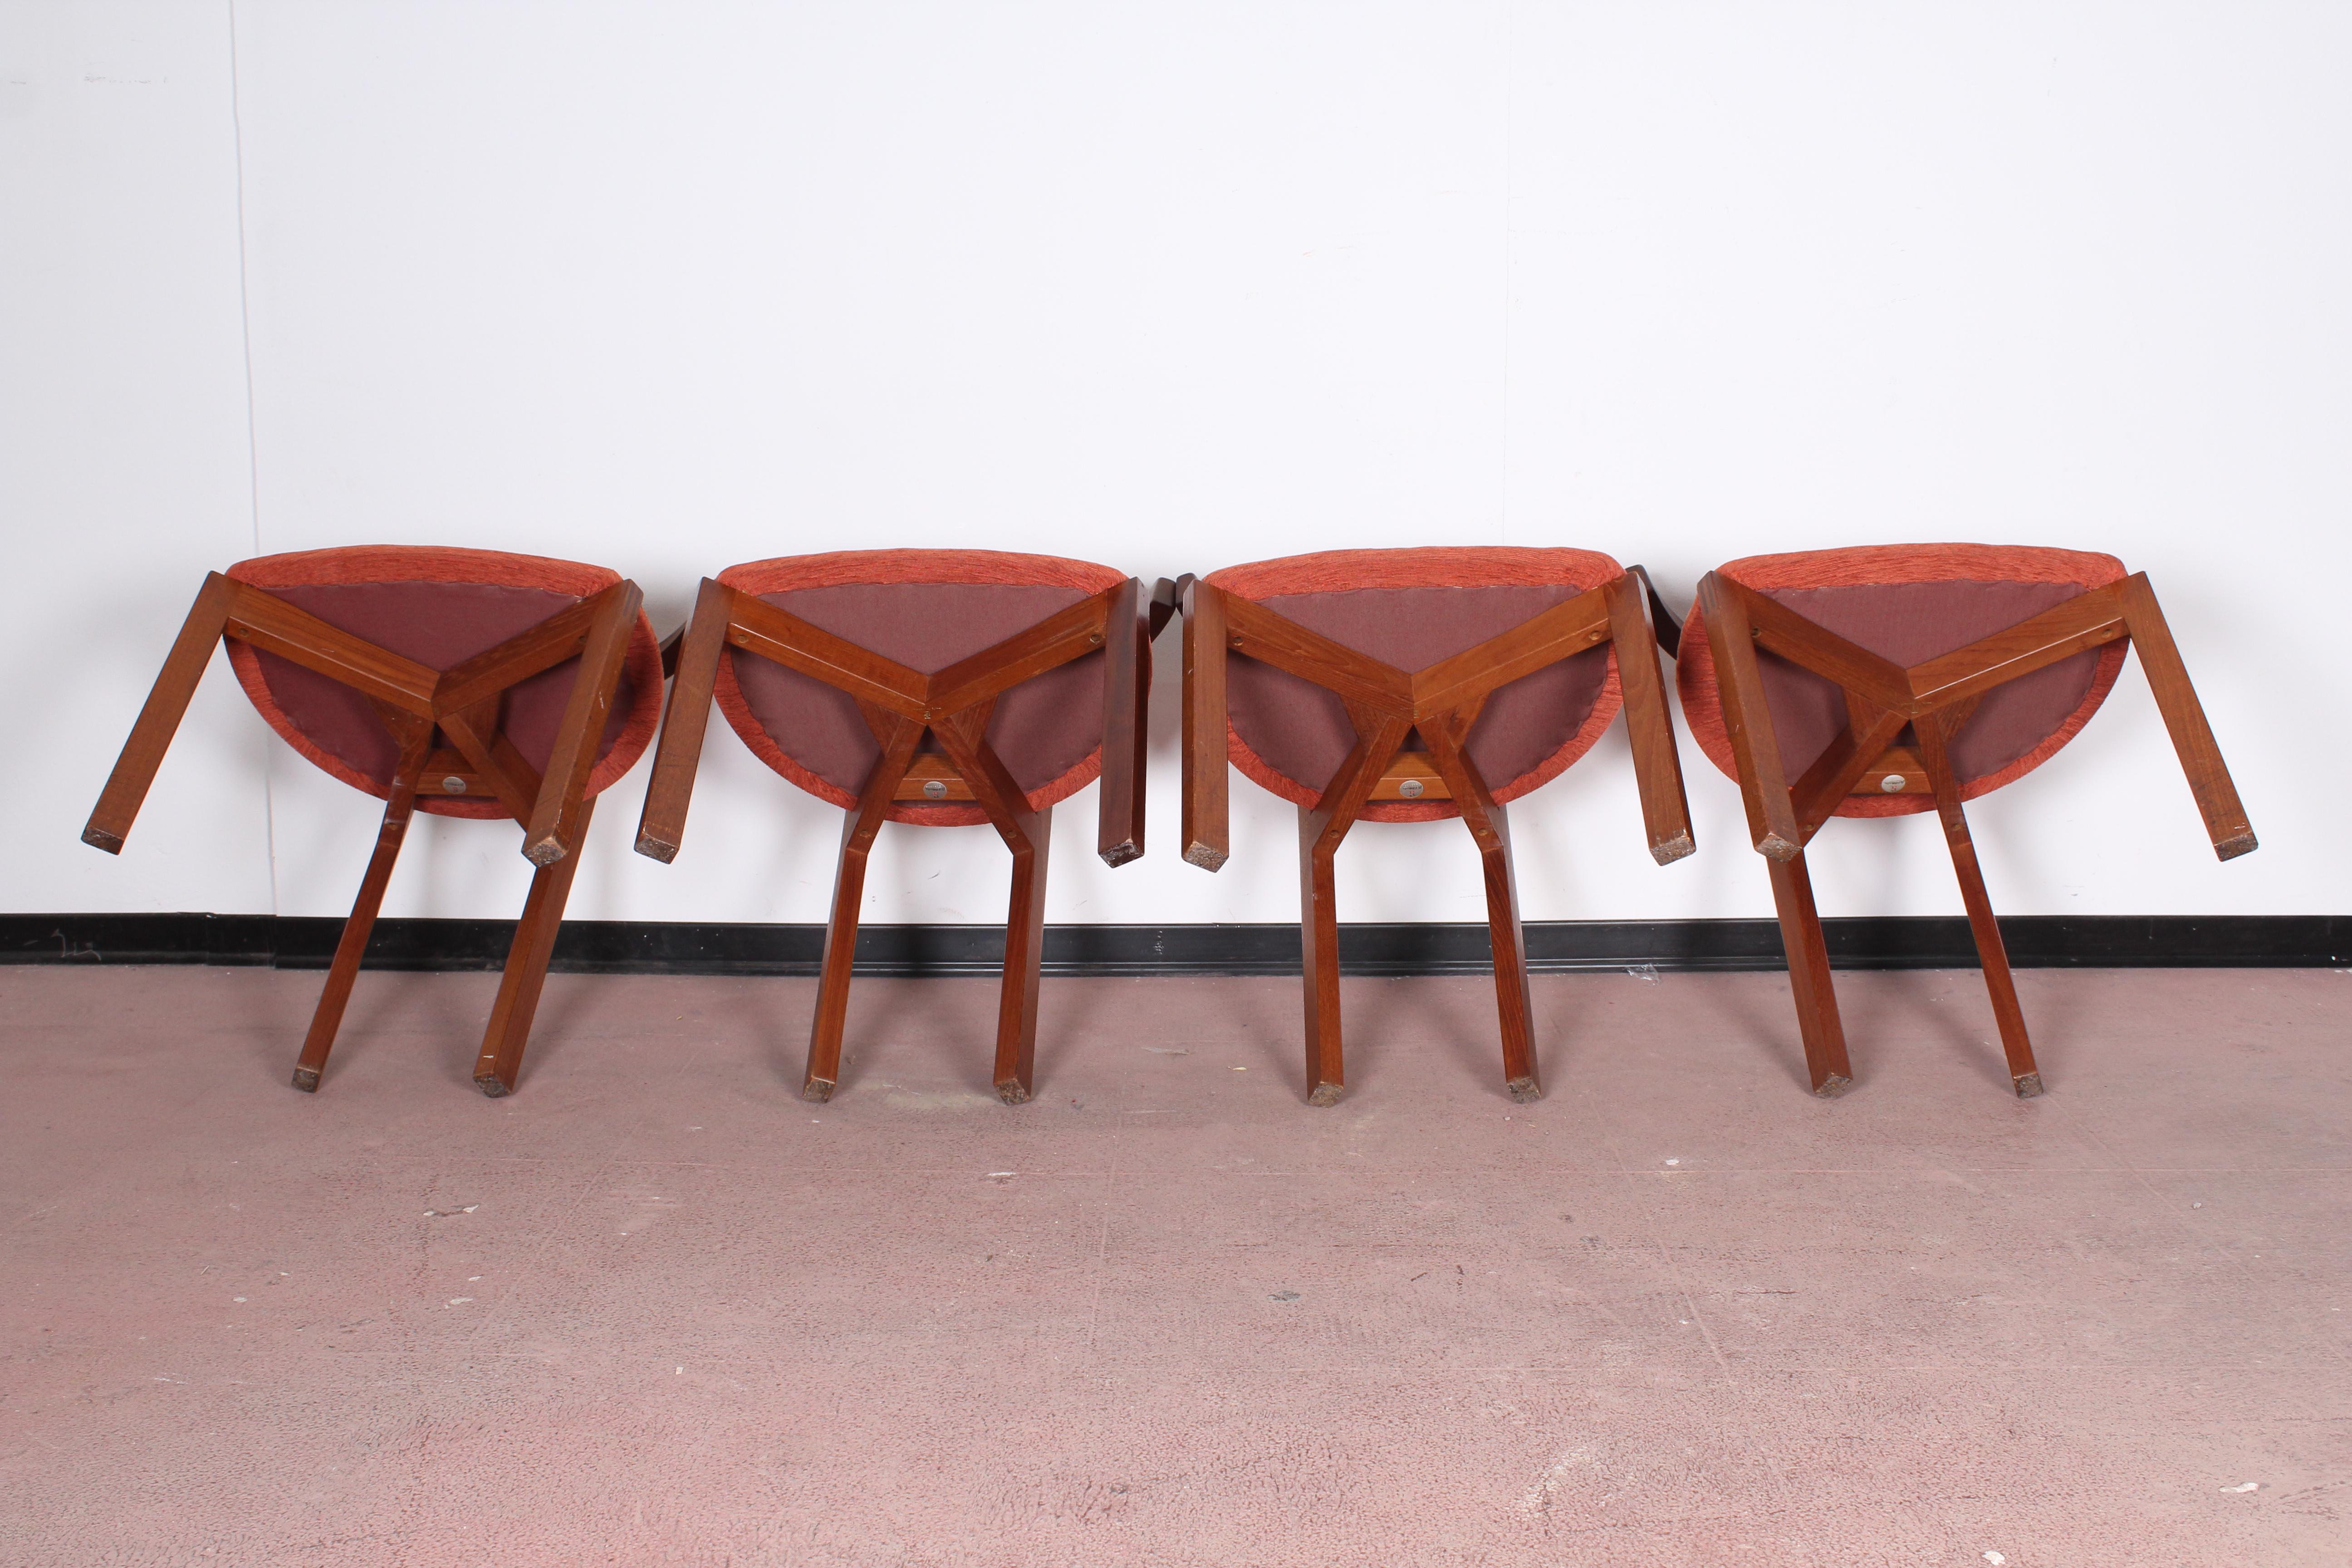  Midcentury Teak Wooden Chairs FF Caffrance 1960 Set of 4 5